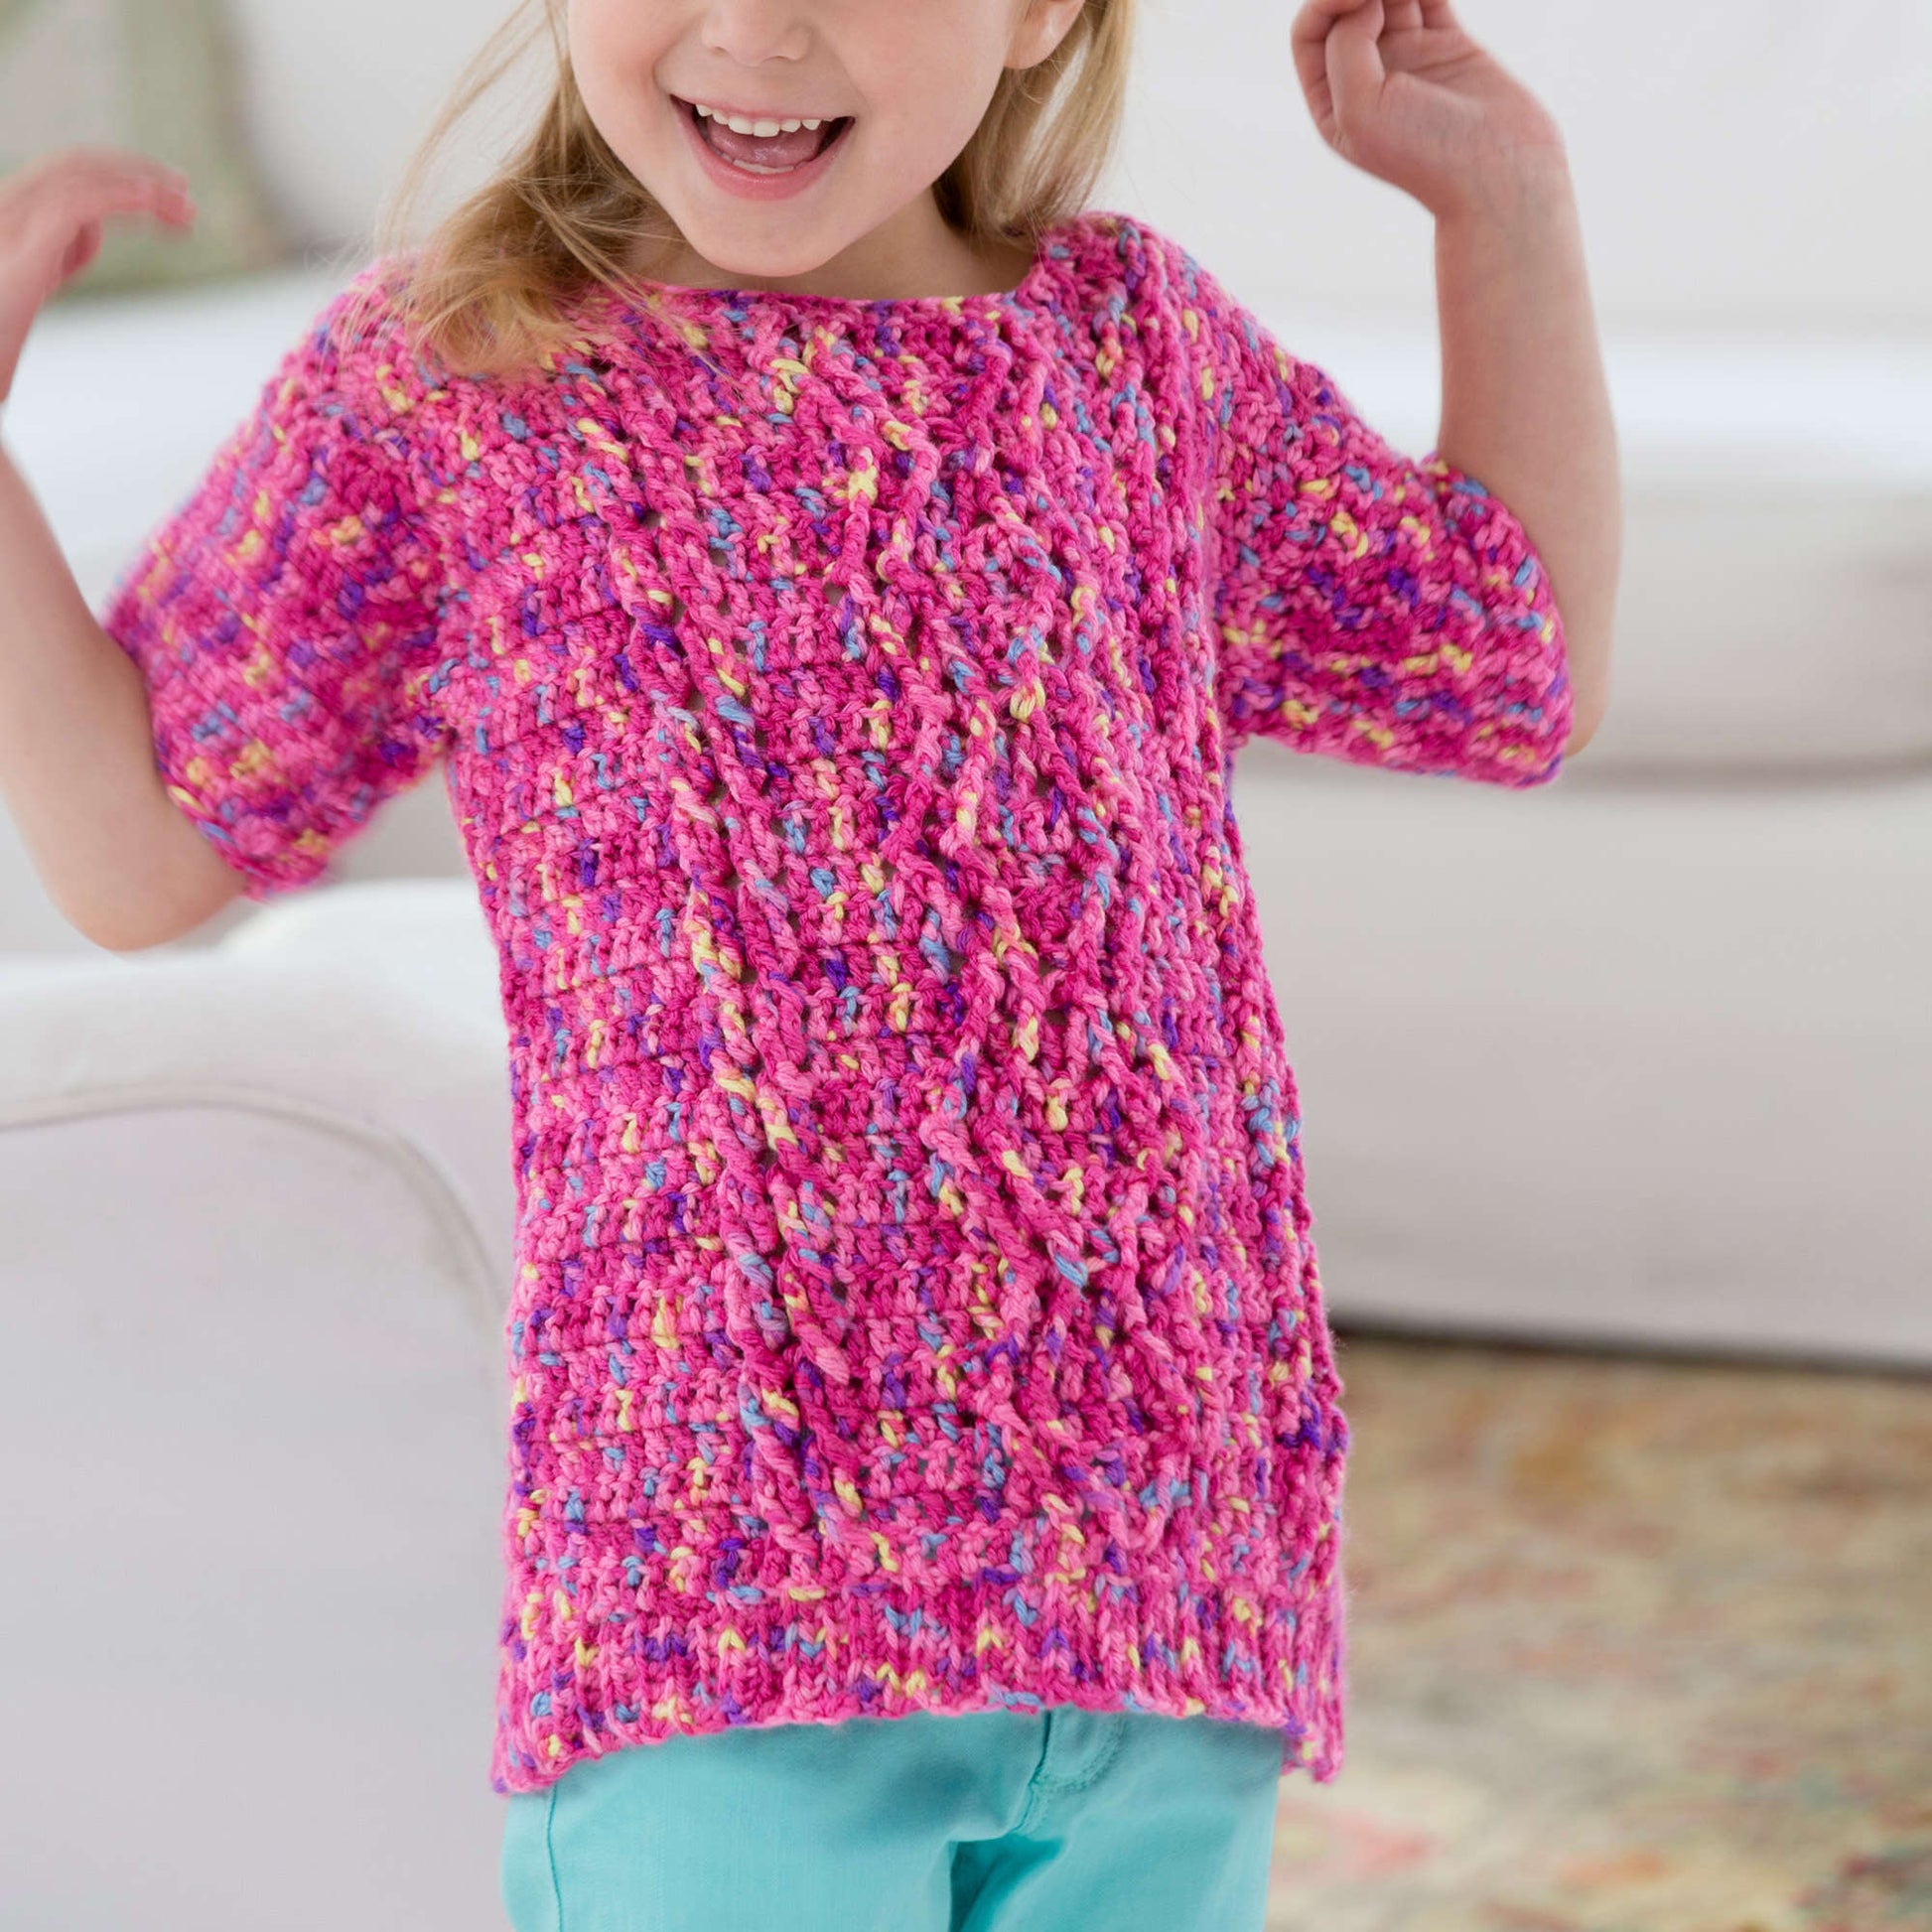 Free Red Heart Girl's Crochet Cable Sweater Pattern